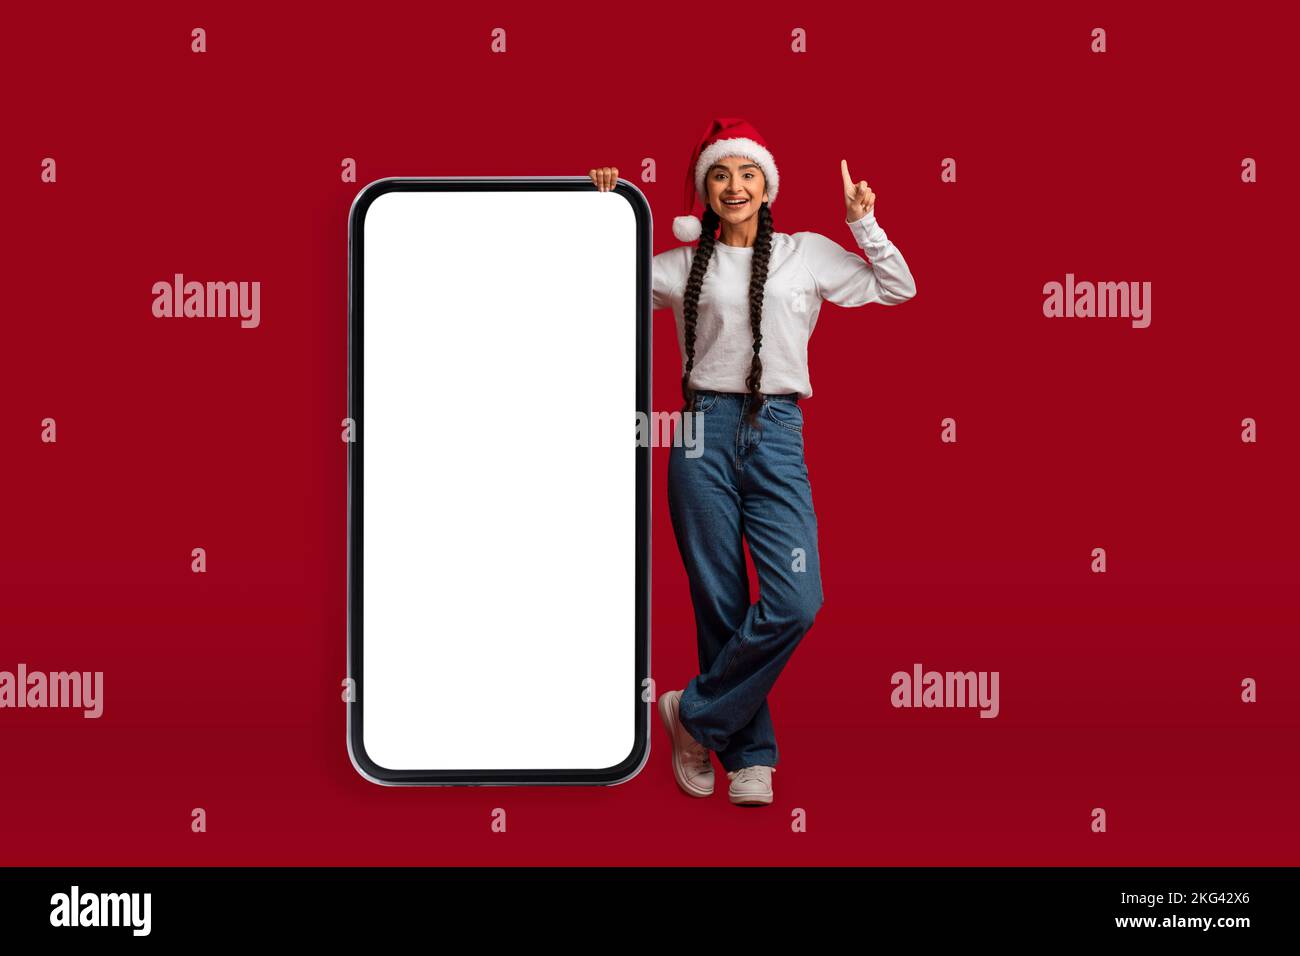 Chistmas Idea. Excited Arab Woman In Santa Hat Standing Near Blank Smartphone Stock Photo